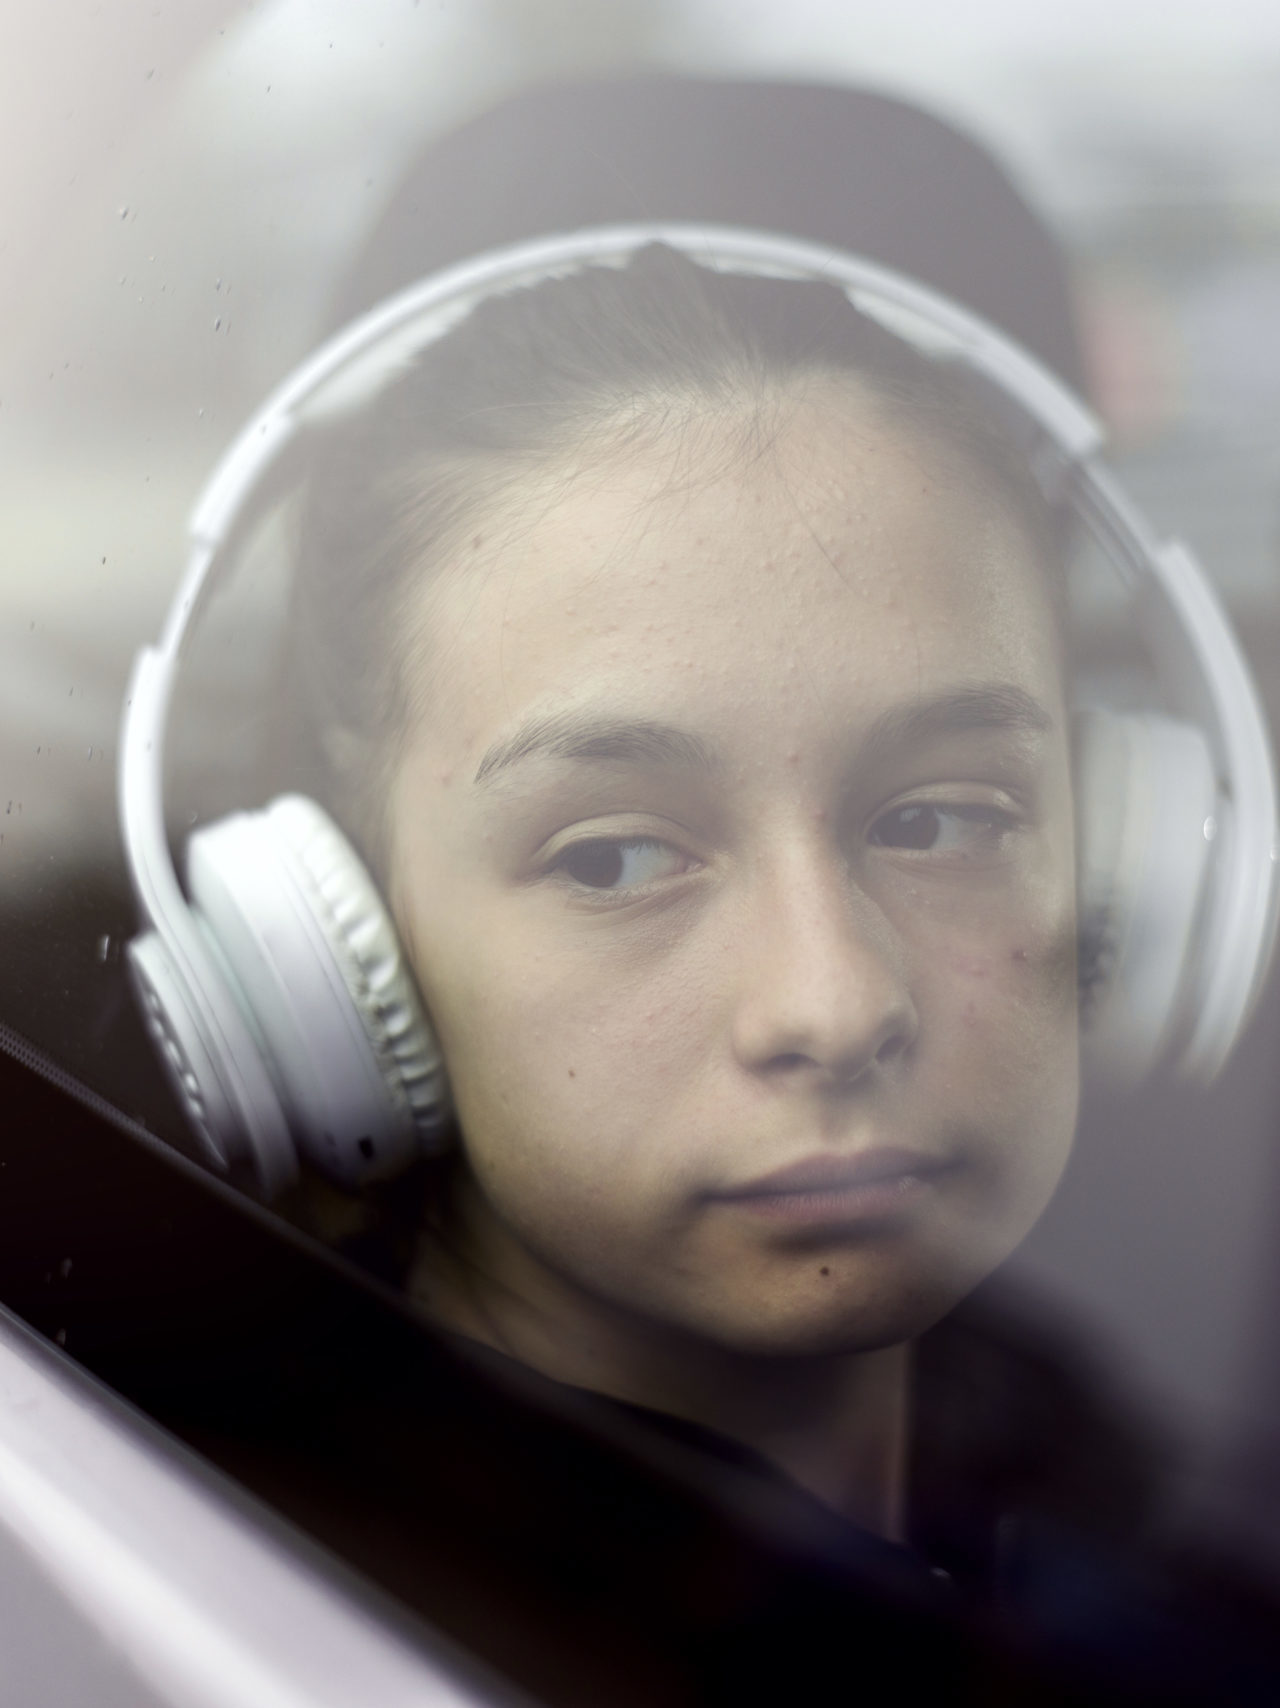 Sad teenager girl inside a car with white headphones on